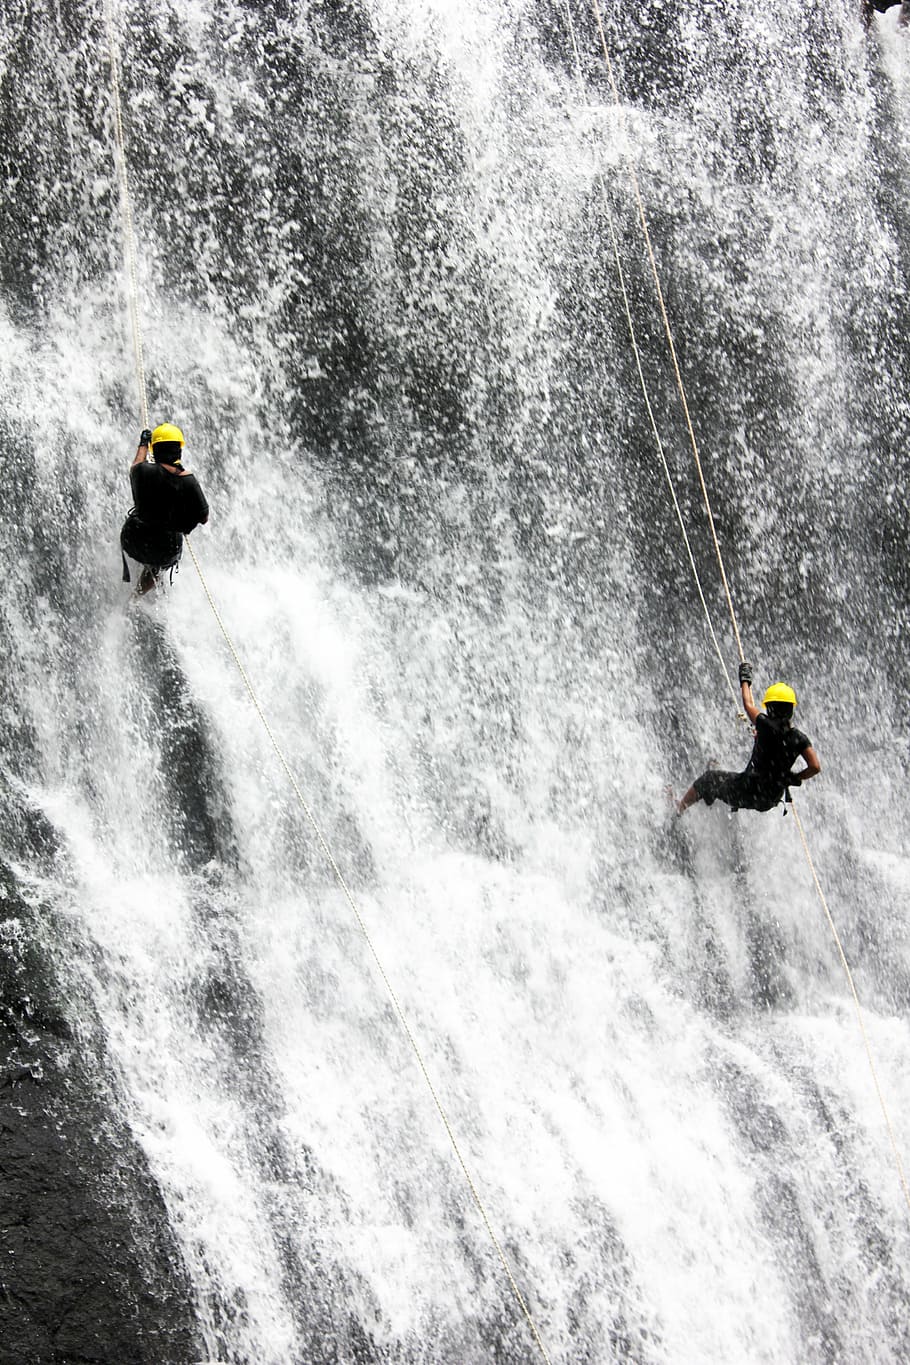 waterfall, people, two, rappelling, climbing, adventure, water, sports, rope, sport